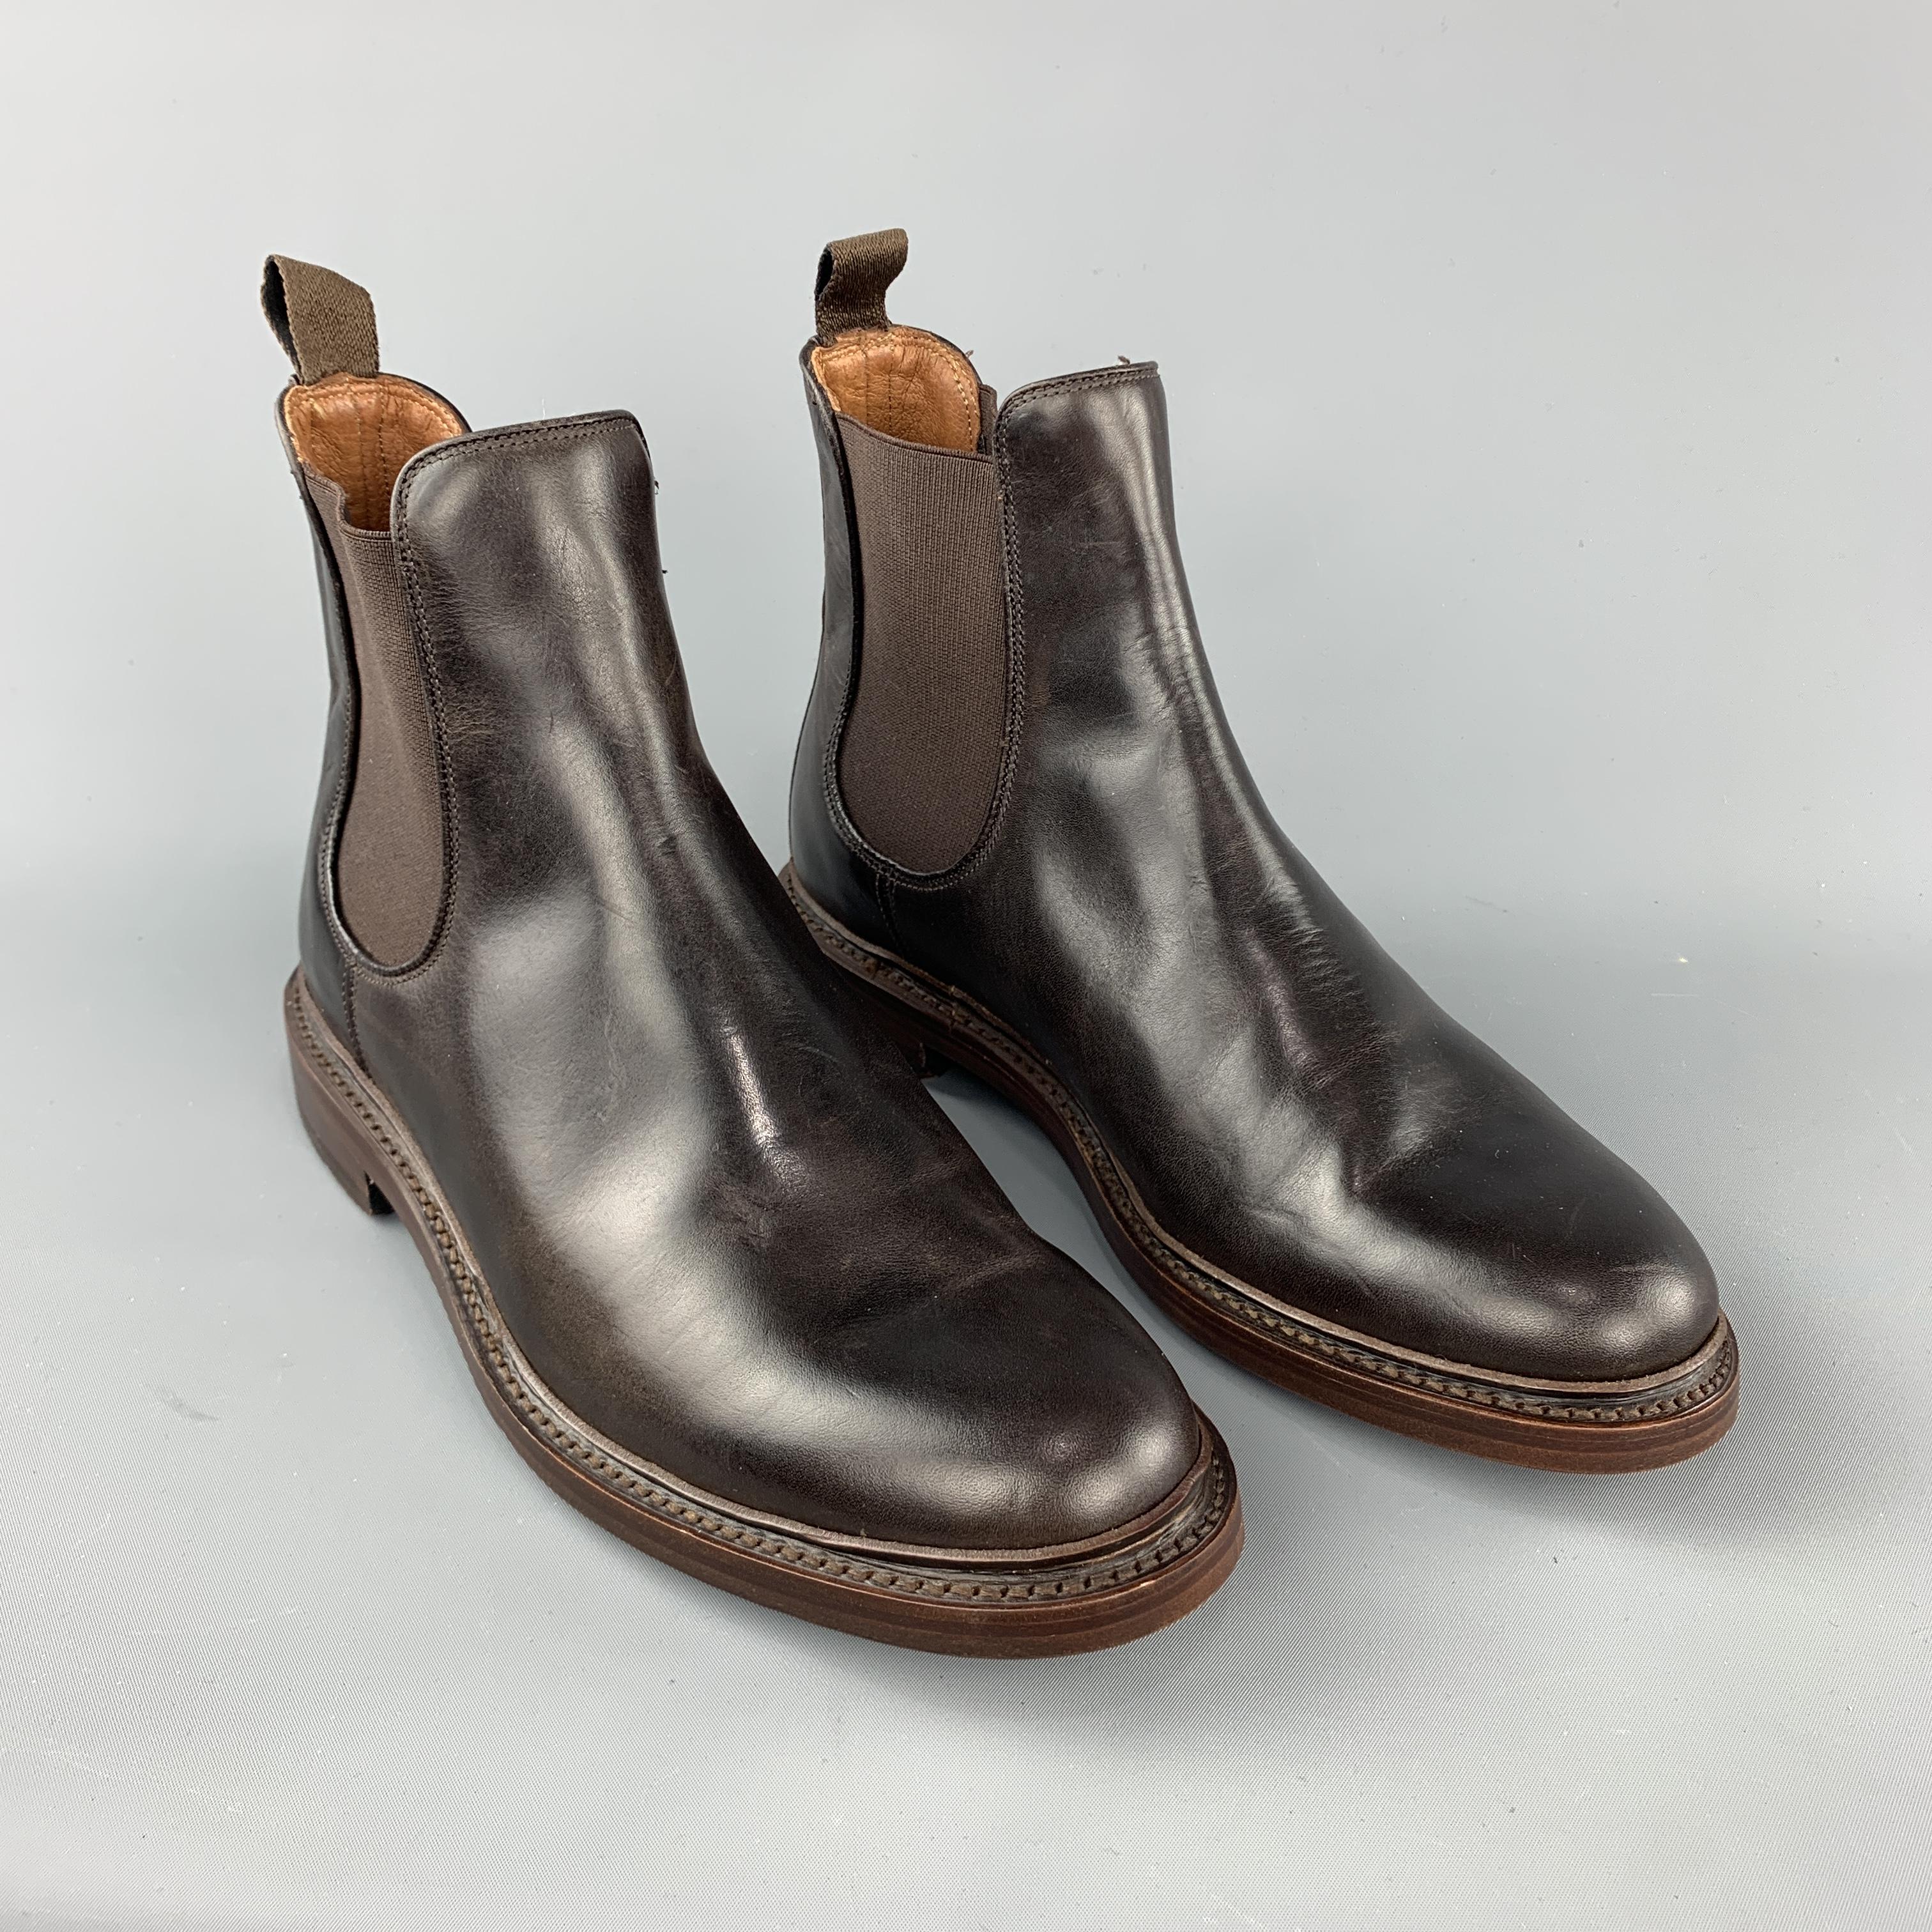 FRYE boot comes in a brown leather featuring a chelsea boot style, pull on, and a wooden sole and heel. Made in Mexico.
 
Excellent Pre-Owned Condition.
Marked:8.5
 
Measurements:
 
Length: 12.5 in.
Width: 4.5 in.
Height: 6.75 in.